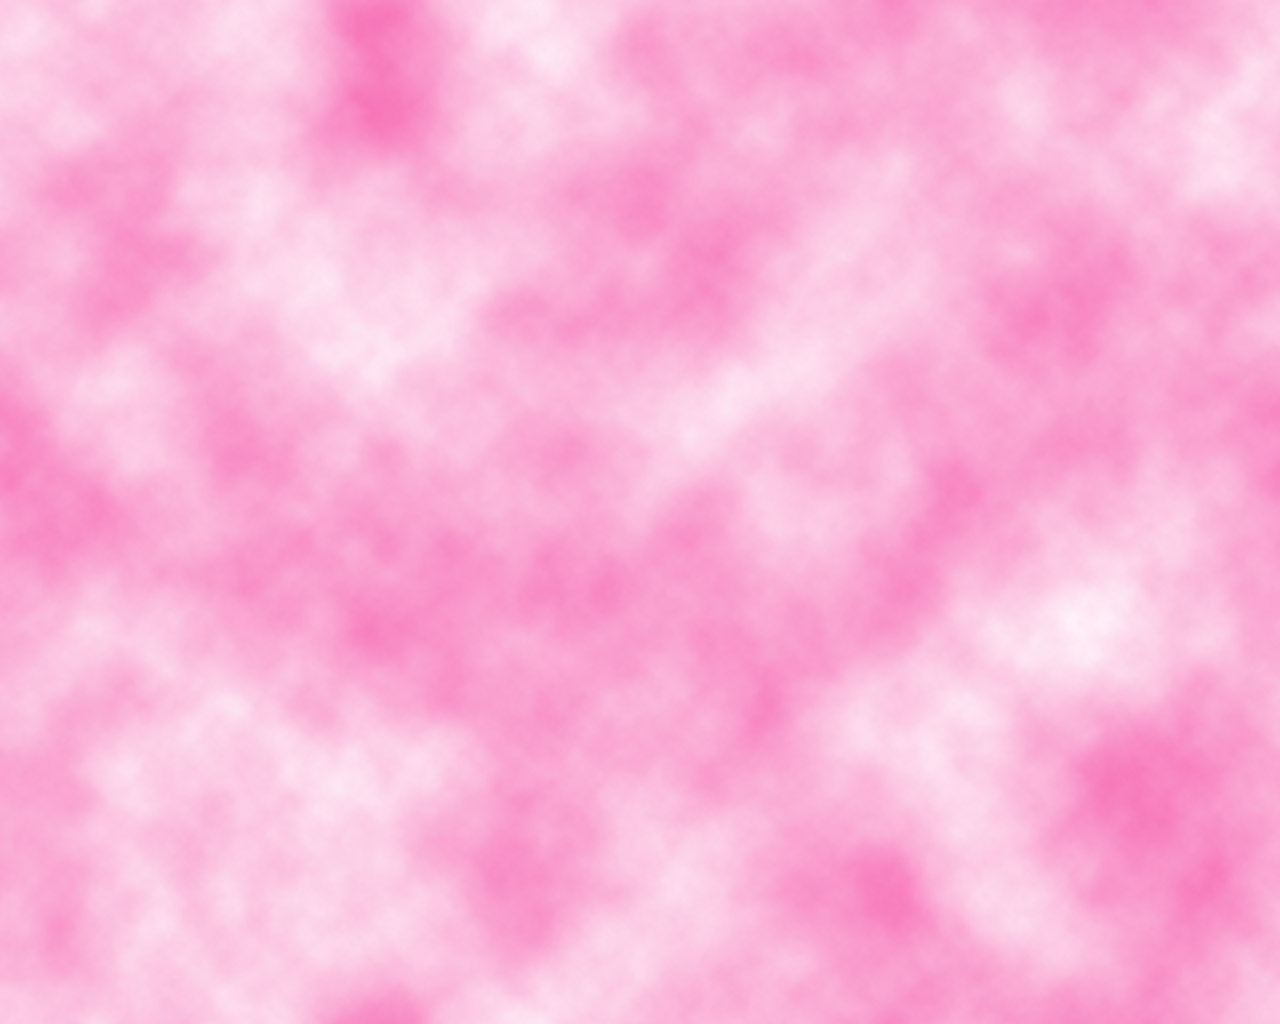 Pink Clouds Background Images Pictures   Becuo